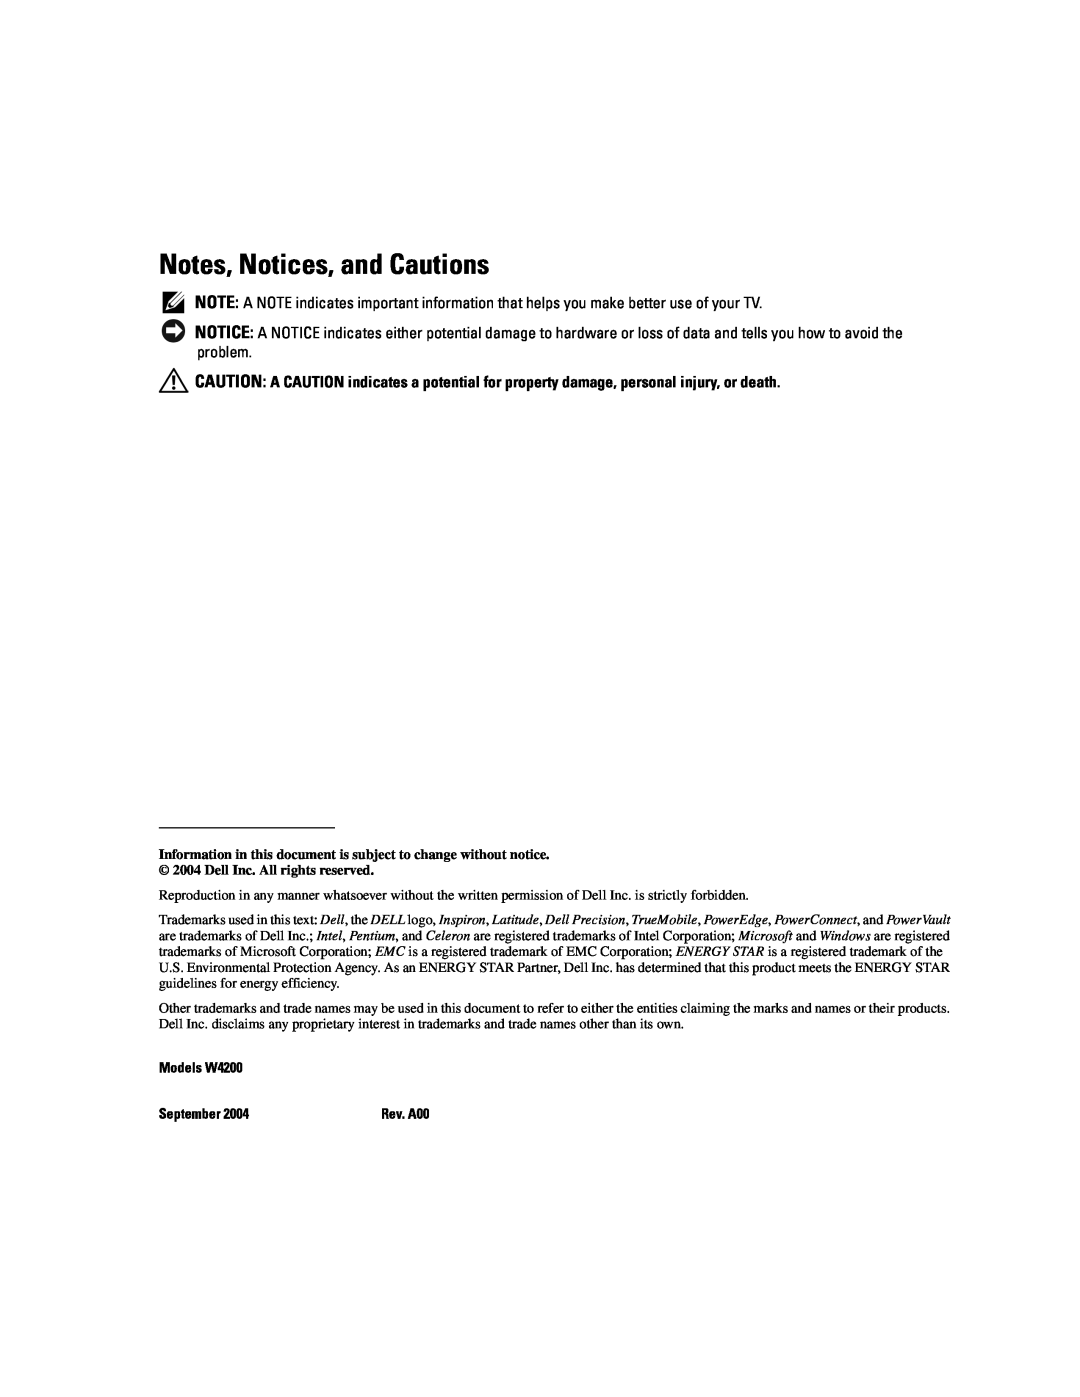 Dell manual Notes, Notices, and Cautions, Models W4200, September 